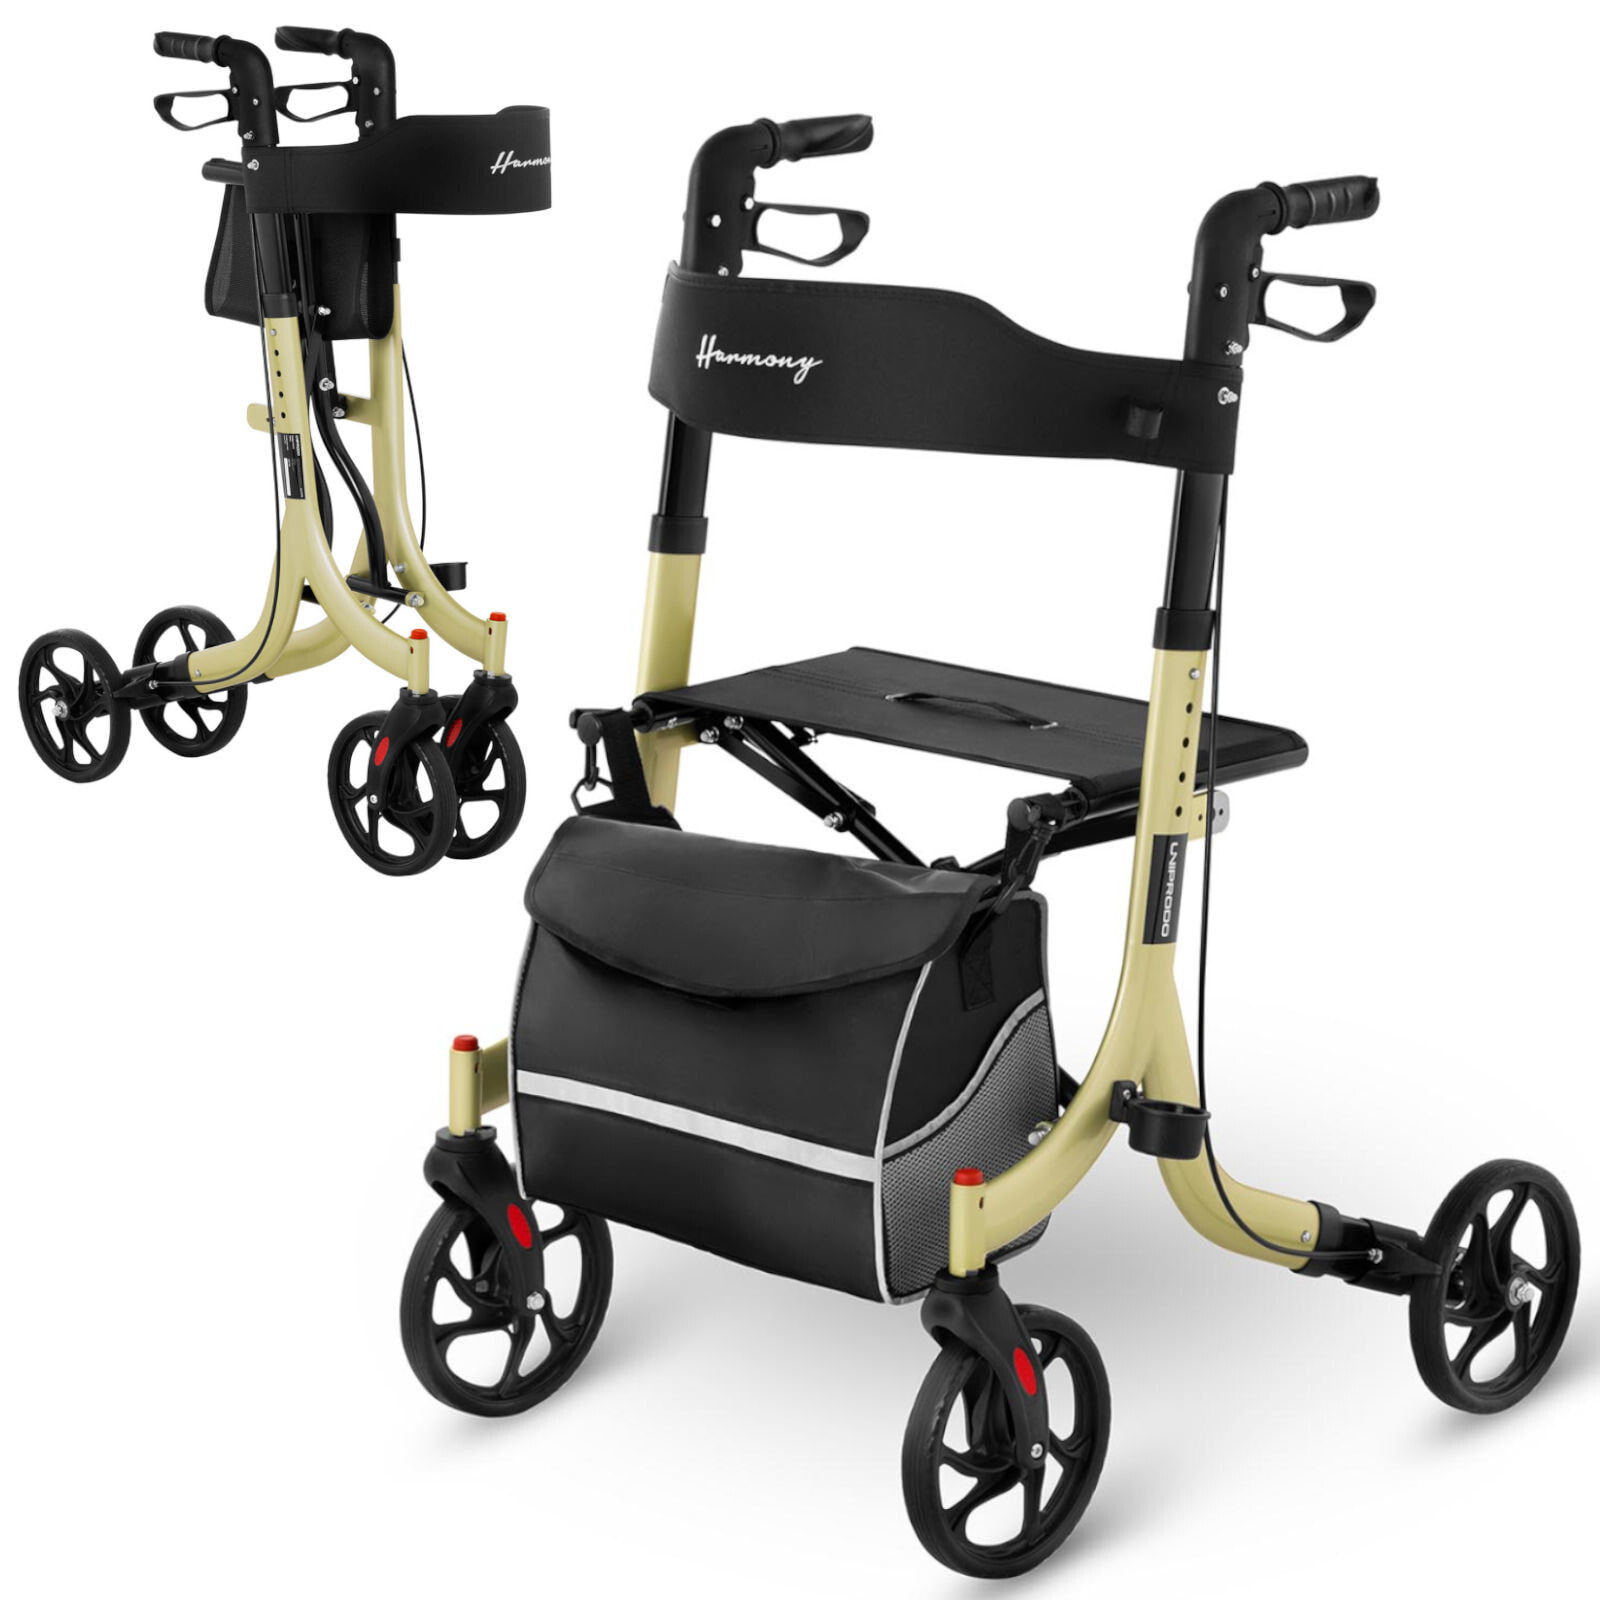 Balcony walker support for senior with a seat and a shopping bag up to 136 kg - gold